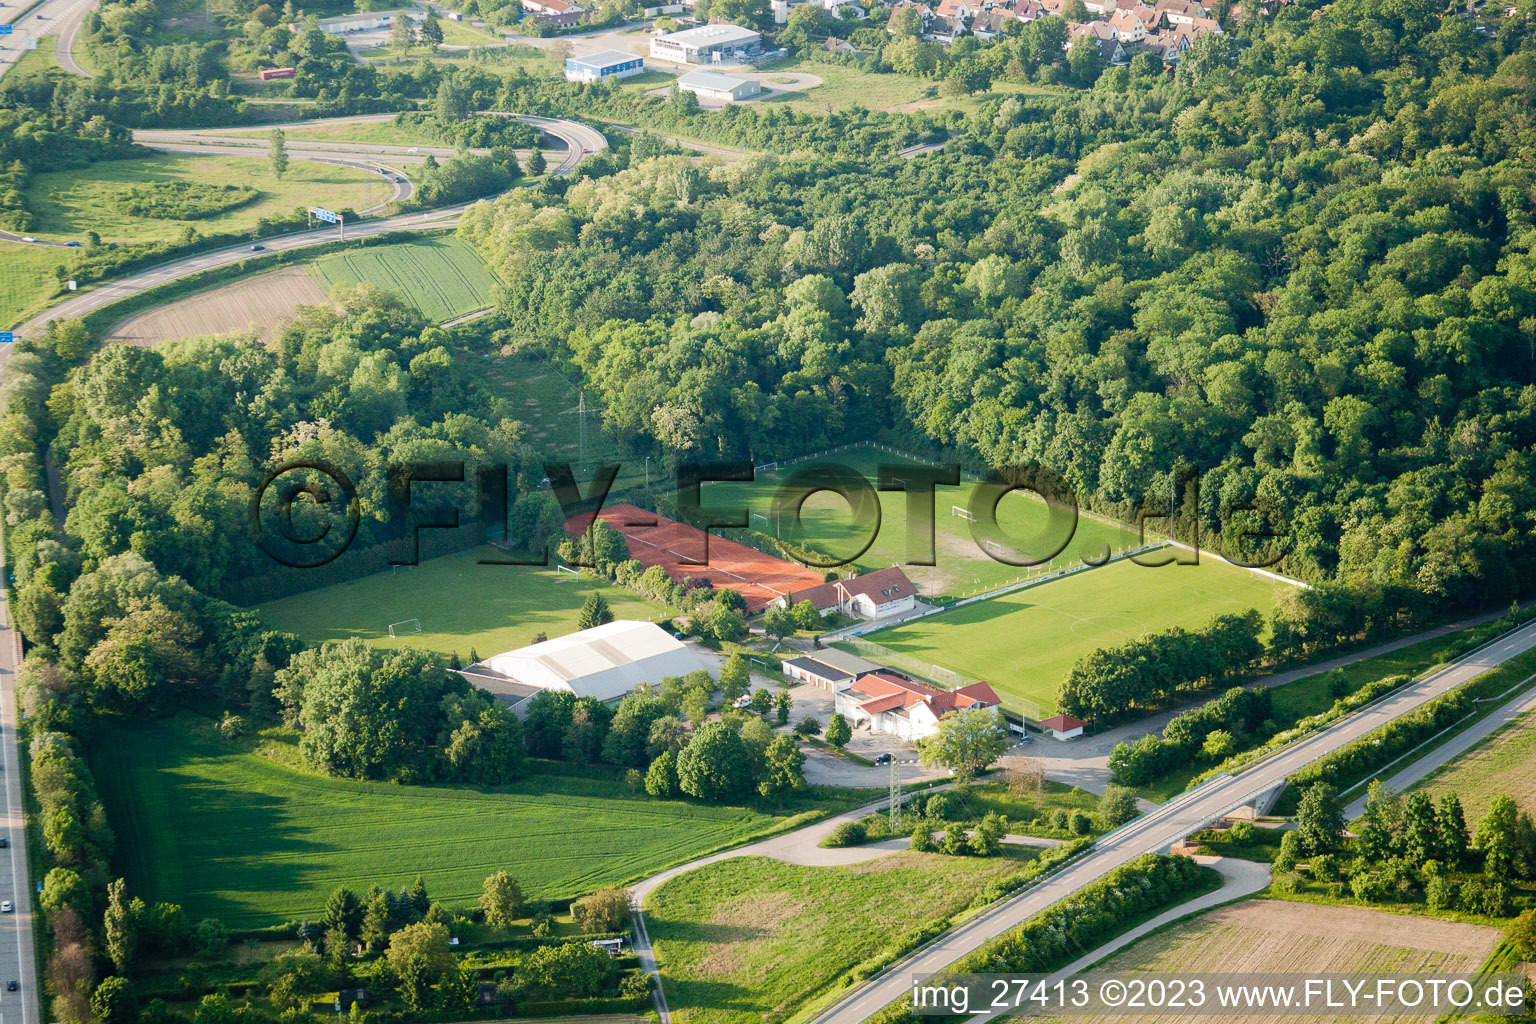 Aerial photograpy of Oberwald Stadium in the district Durlach in Karlsruhe in the state Baden-Wuerttemberg, Germany